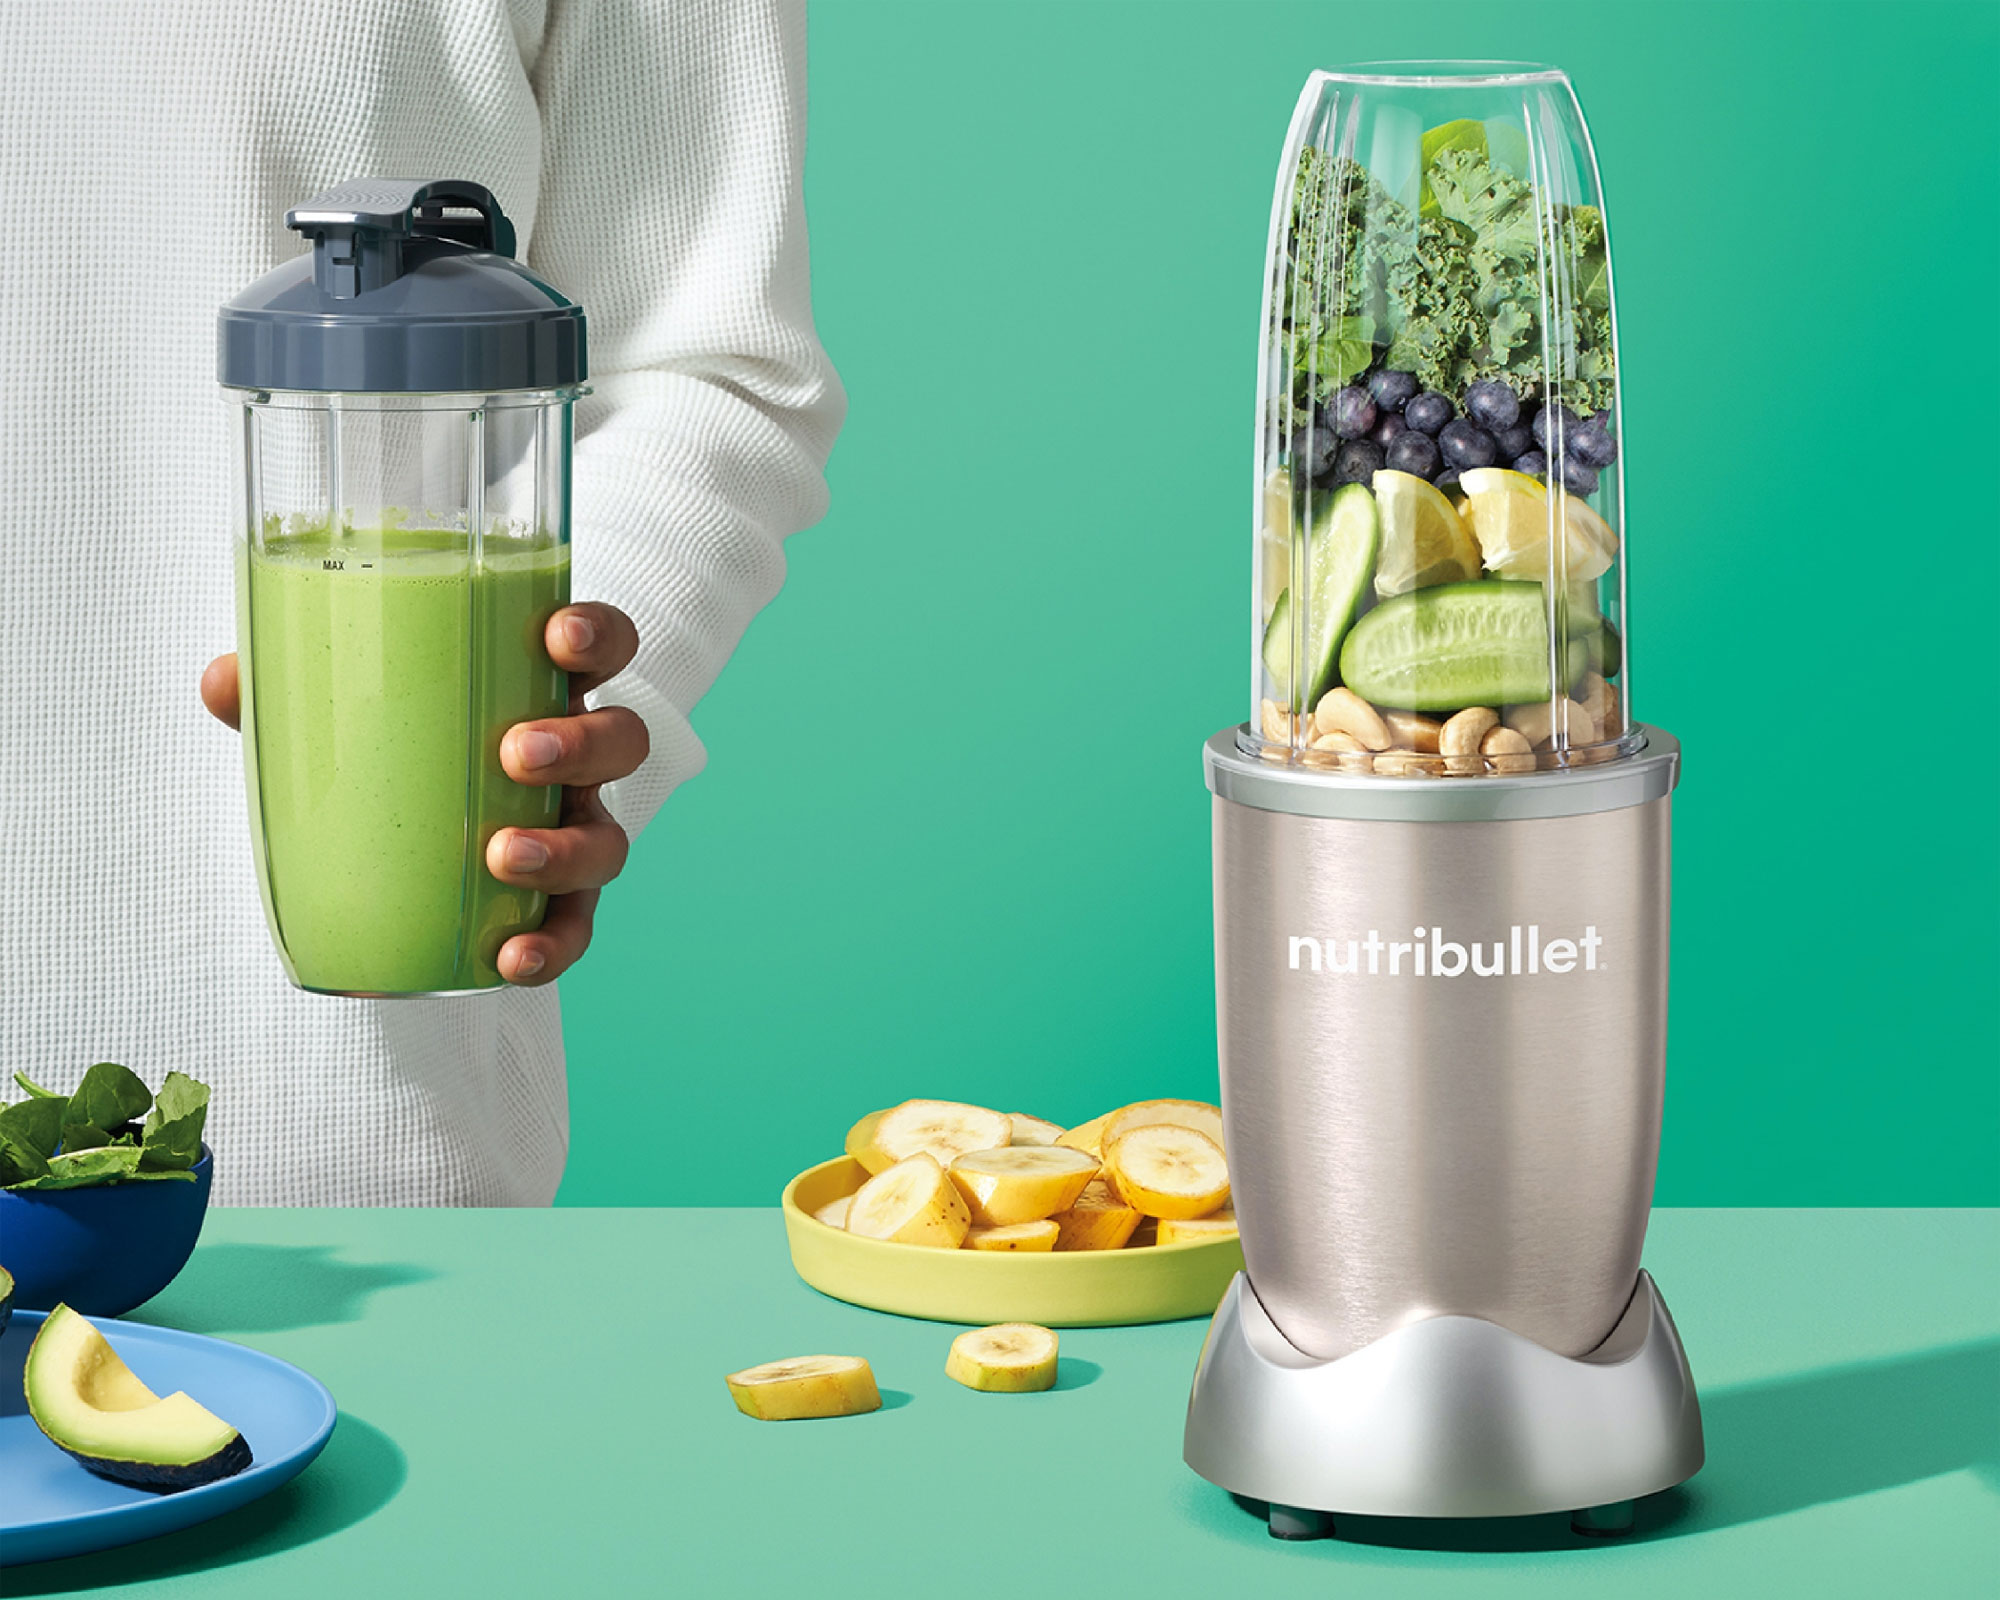 What can you make in a Nutribullet